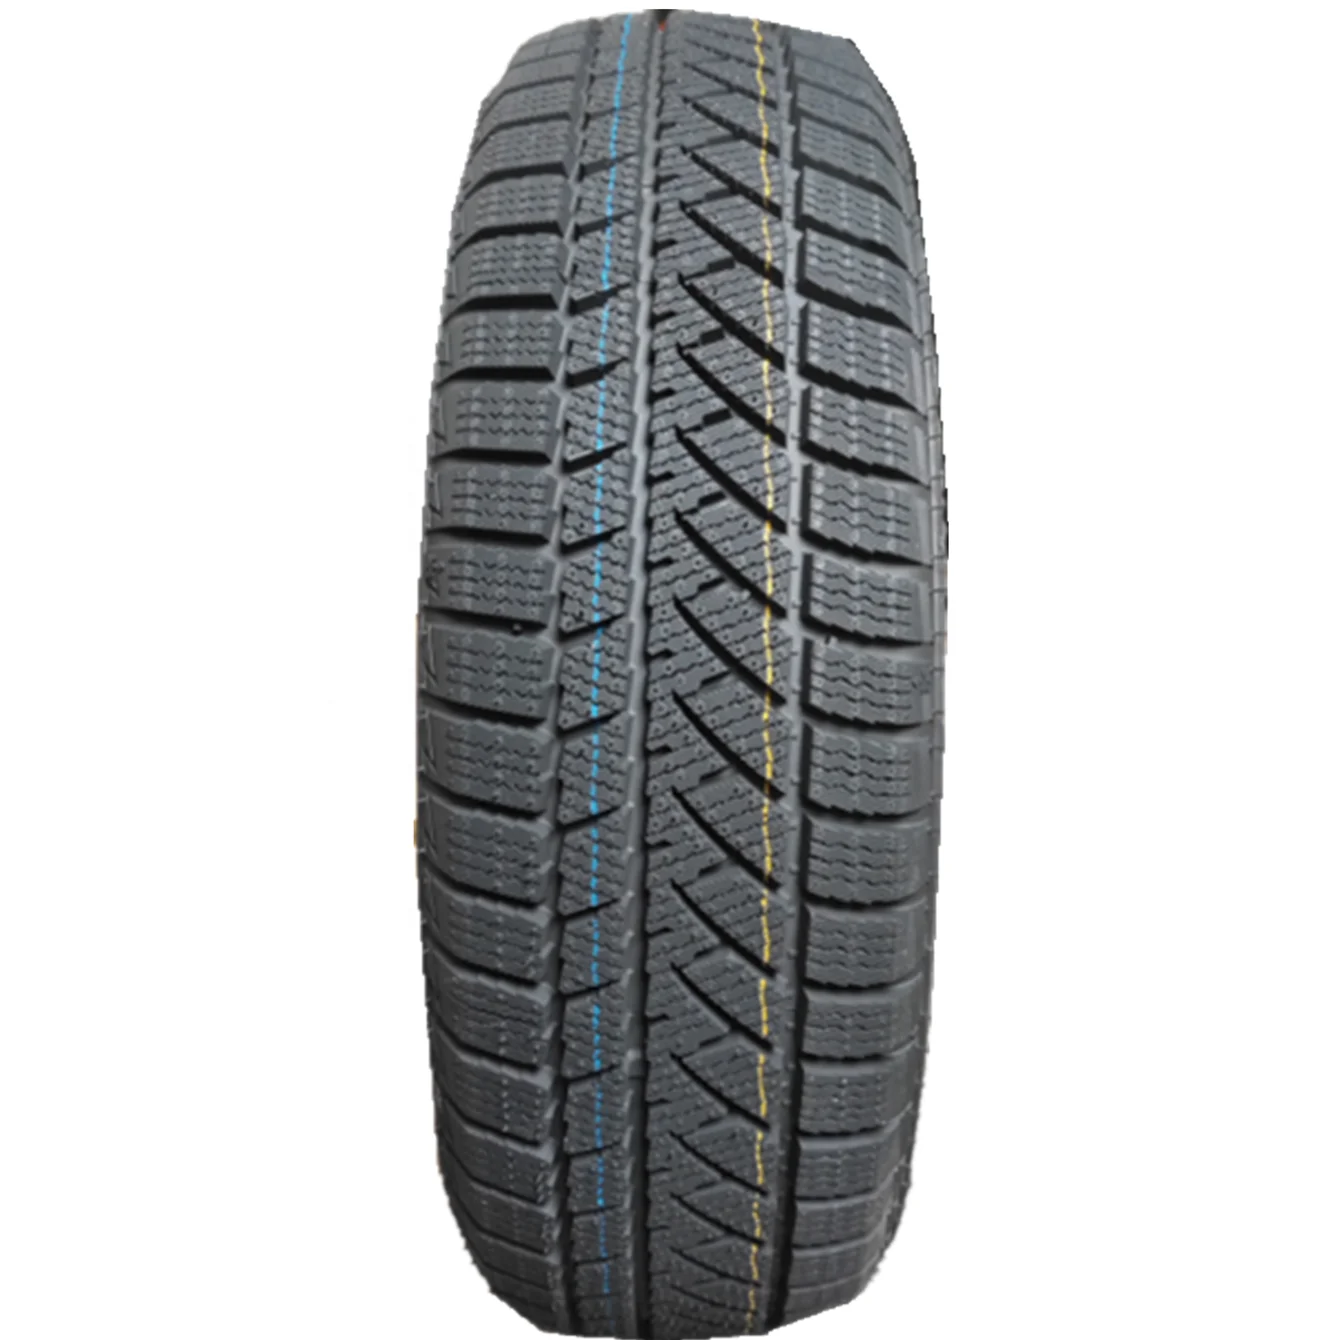 Car Tyre Pcr 165/55/14 Buy Tires Direct From China 165 55 14 Winter Tyres  165/65 R14 - Buy Winter Tires Car,Llantas,Mud Tyres For Suv Product on  Alibaba.com